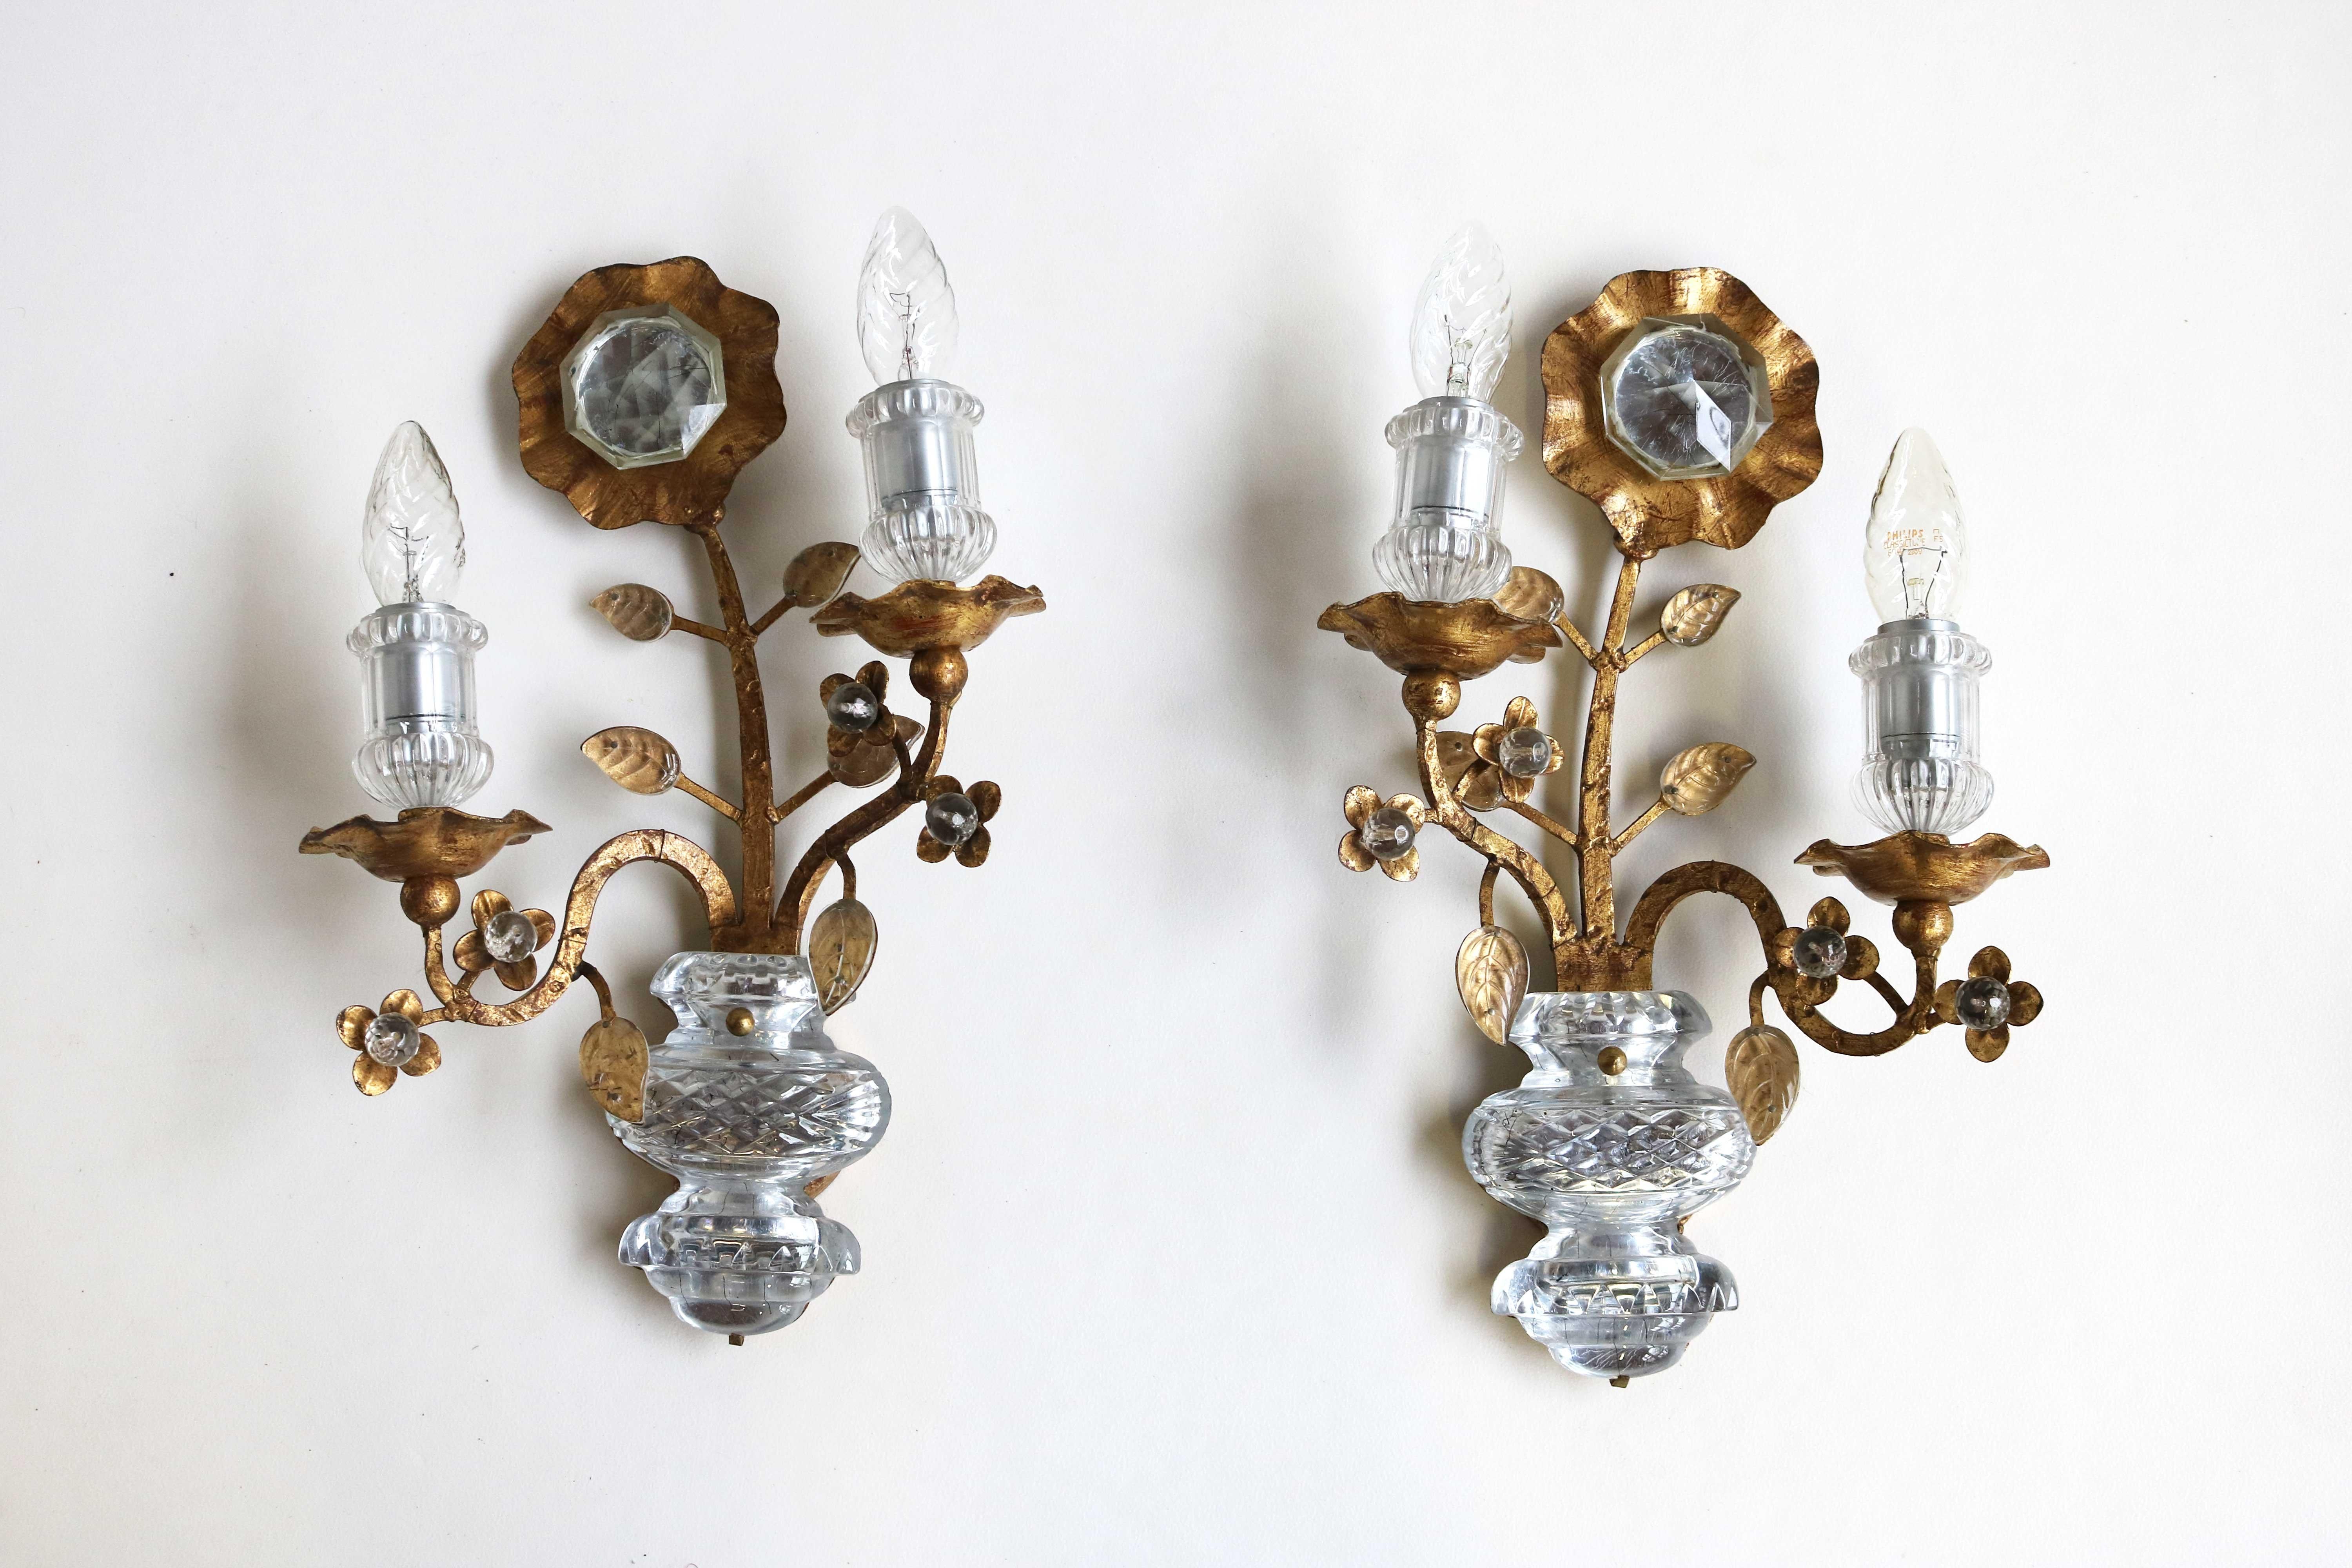 Set of two Maison Baguès crystal & gilt metal sconces or wall lamps 1960s France
Beautiful, rare and incredibly decorative pair of gilt scones by Maison Bagues. This set screams craftmanship and quality. Both in very good condition. They are a